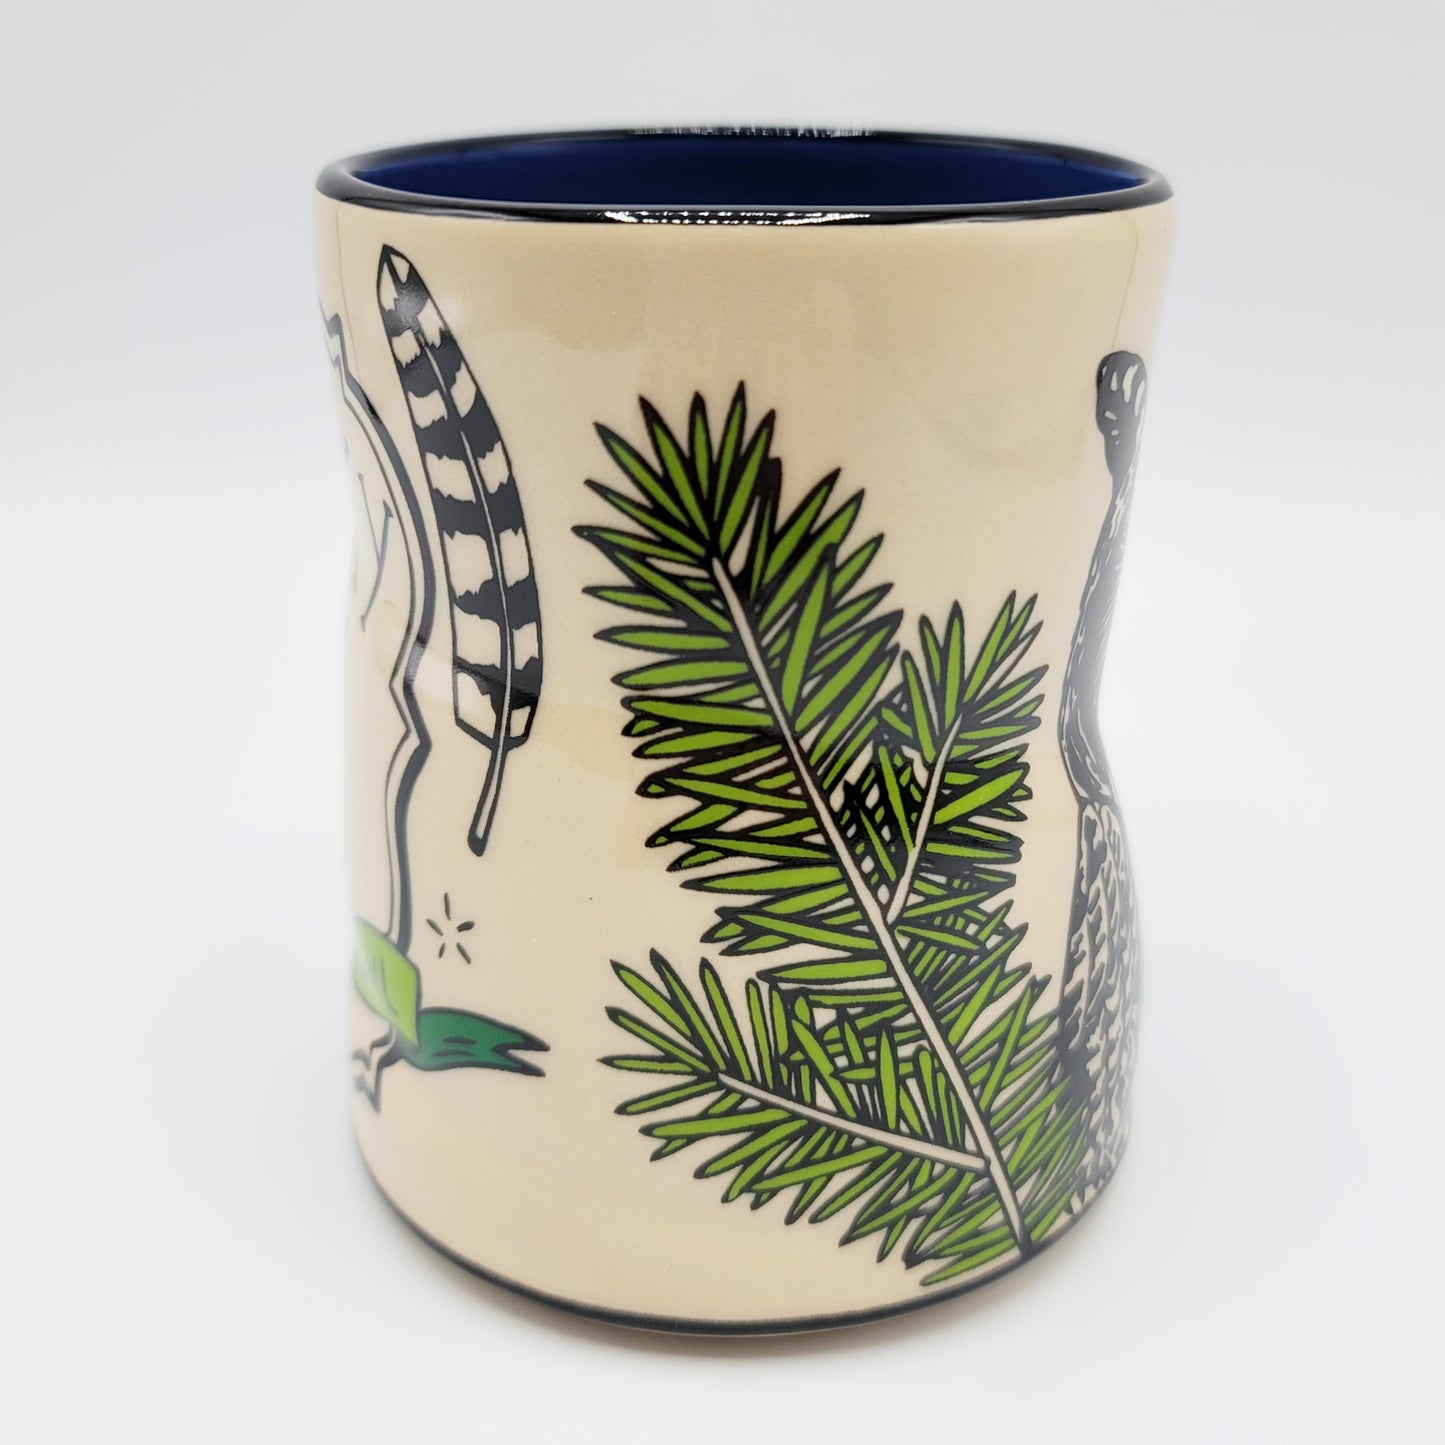 Great Horned Owl Lucky Cup - X-Large